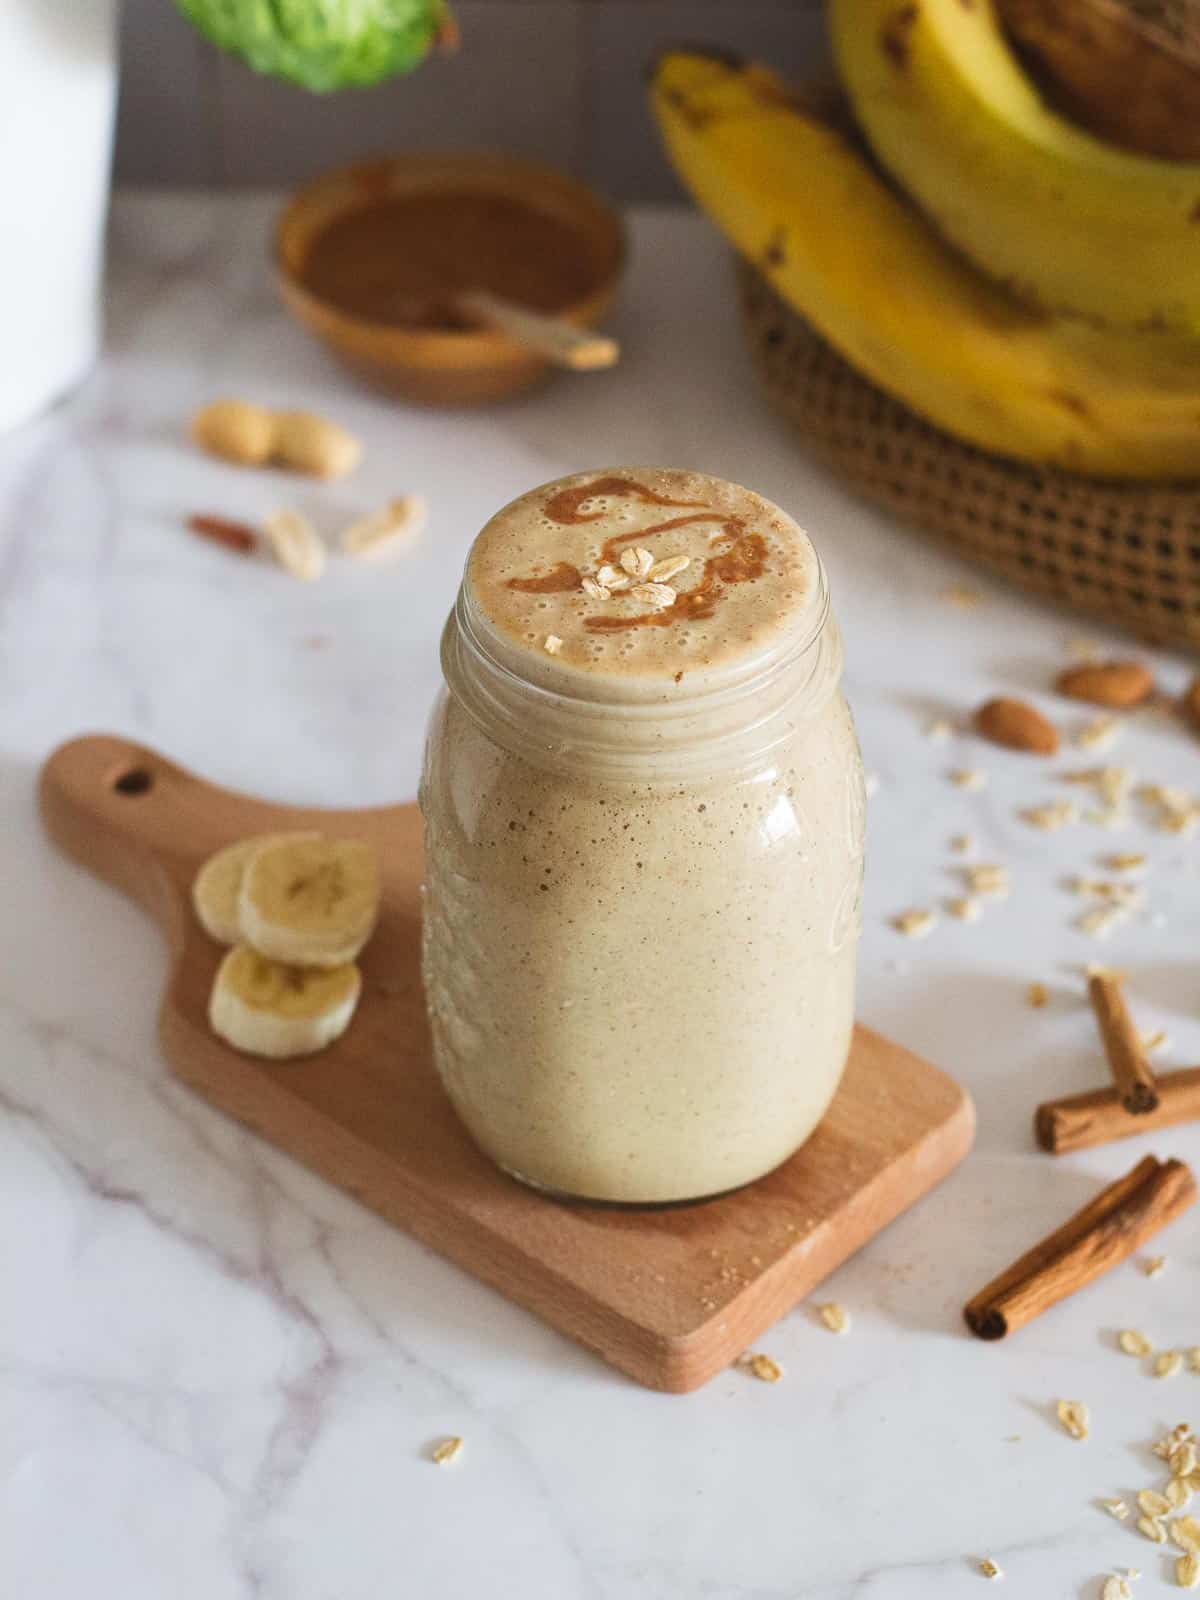 Banana Oatmeal and peanut butter Breakfast Smoothie